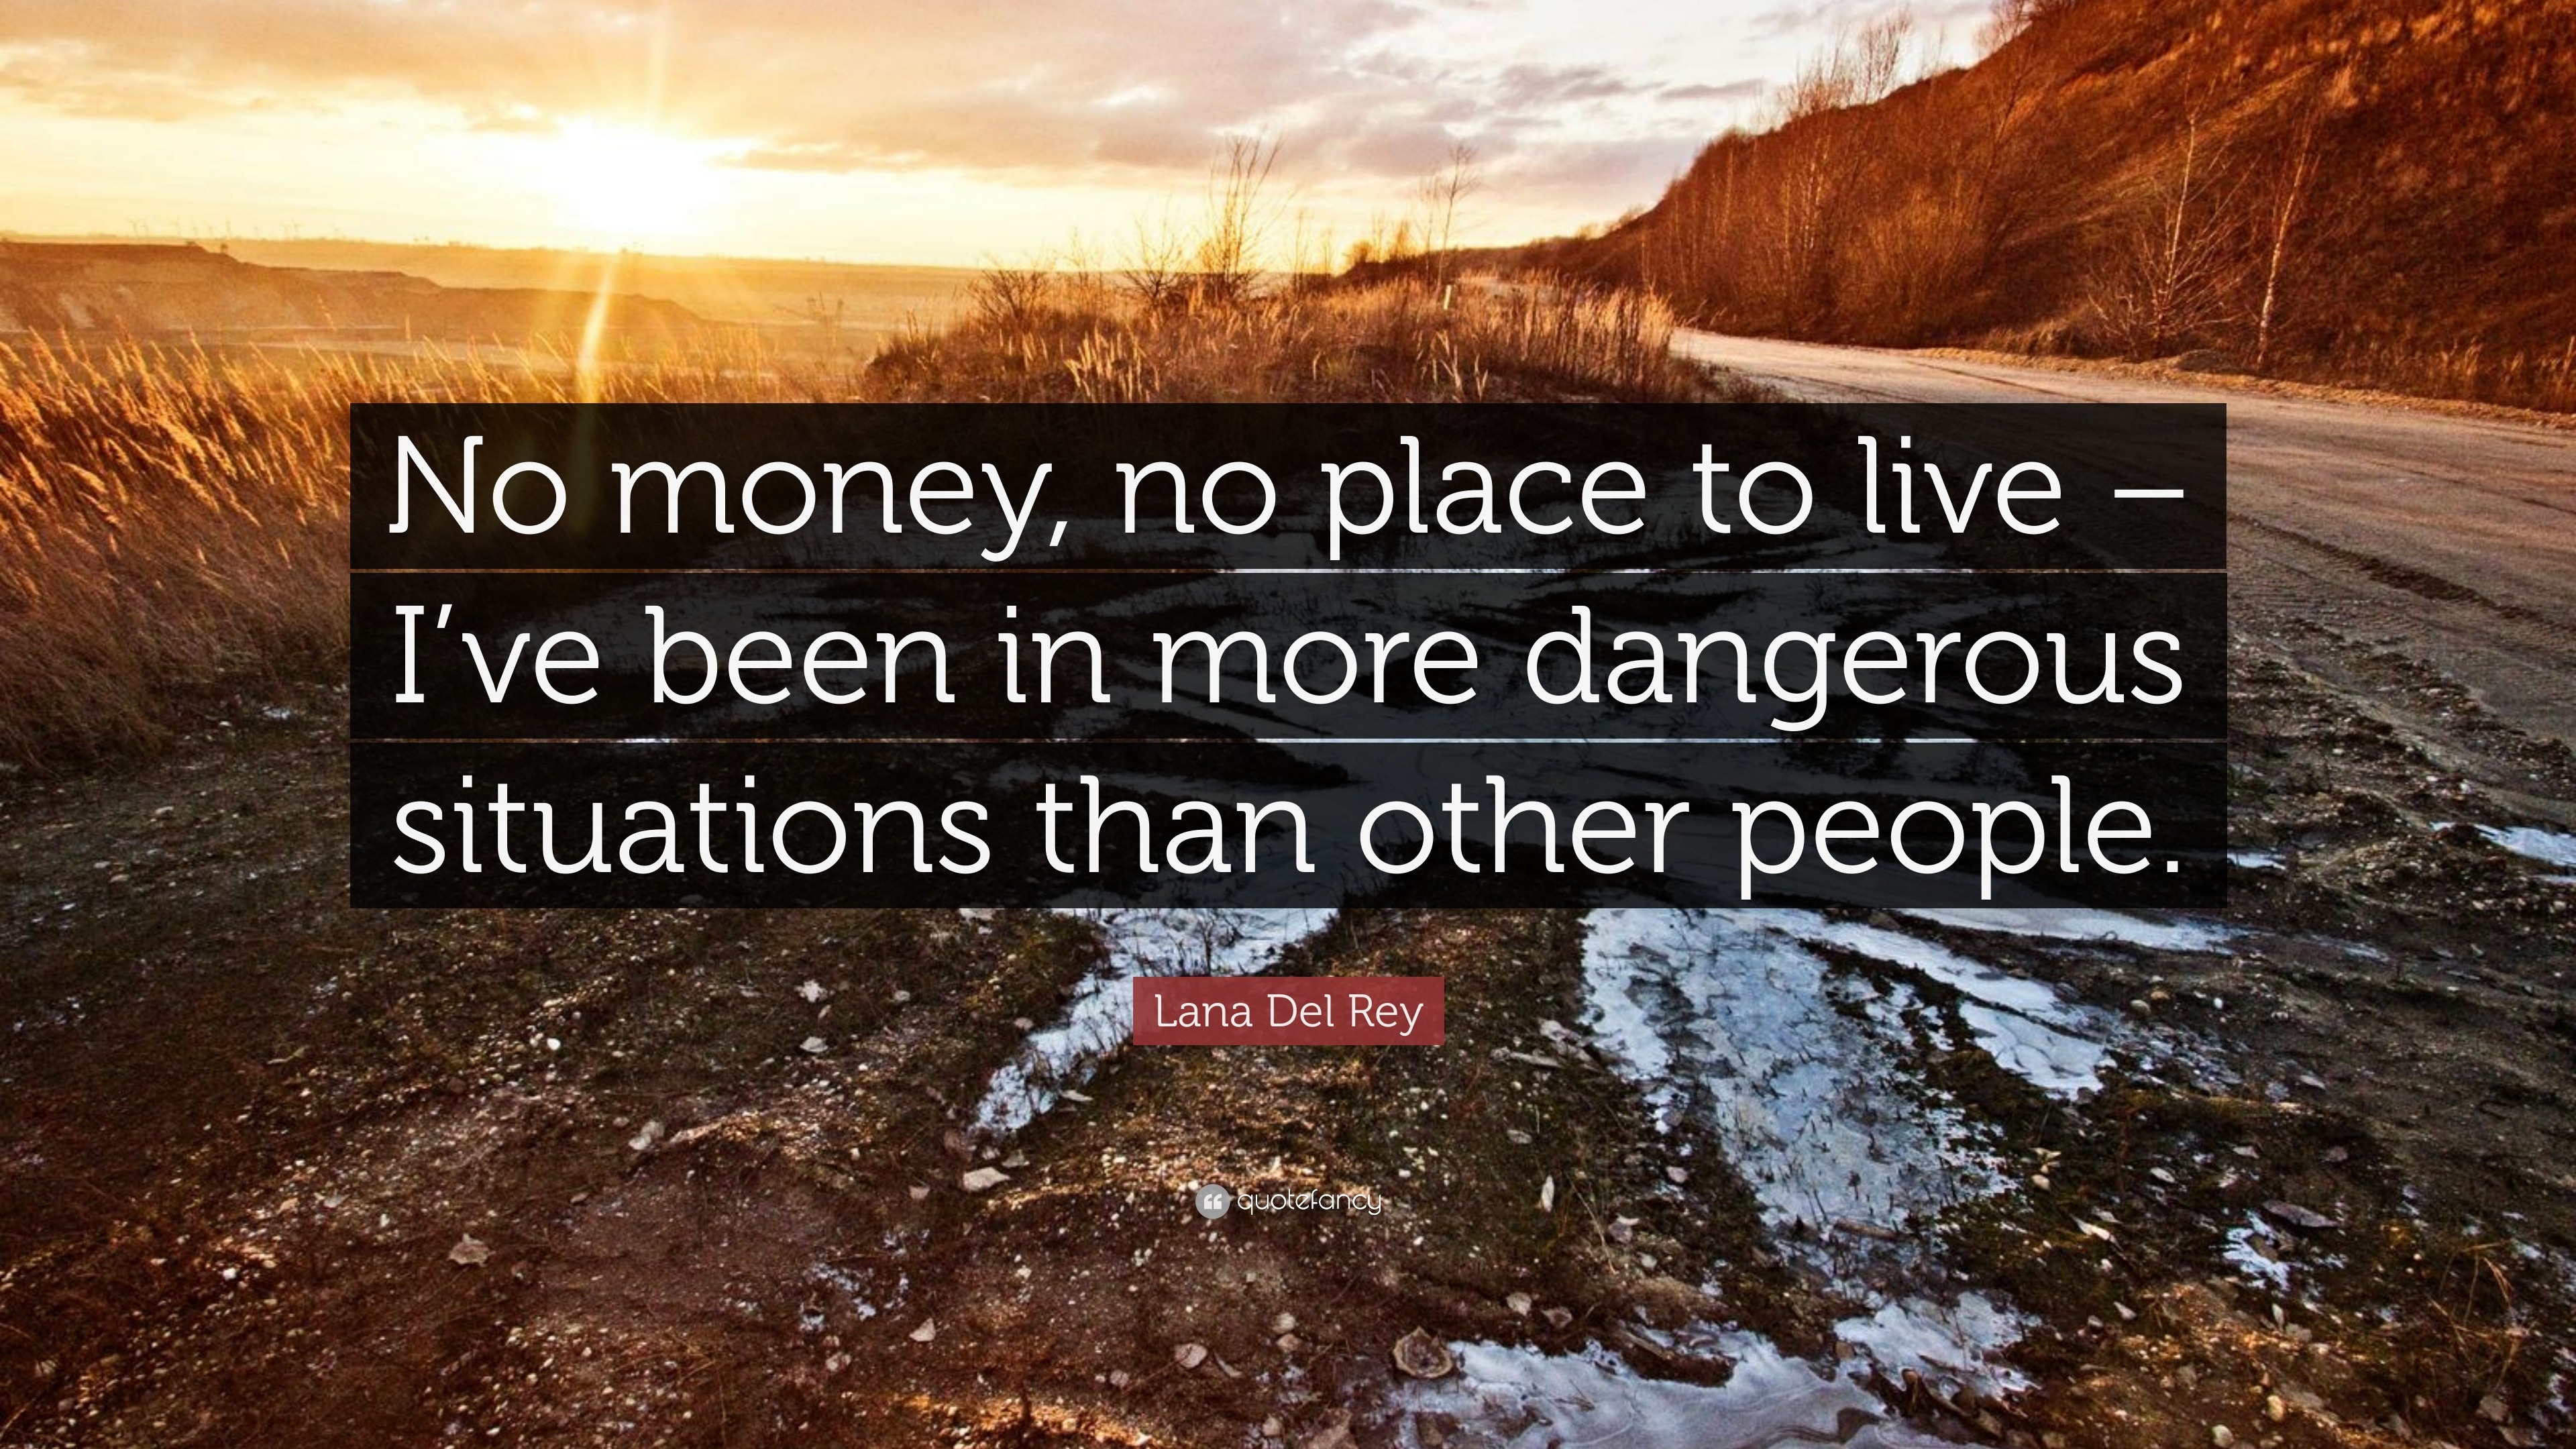 Lana Del Rey Quote: “No money, no place to live – I’ve been in more ...